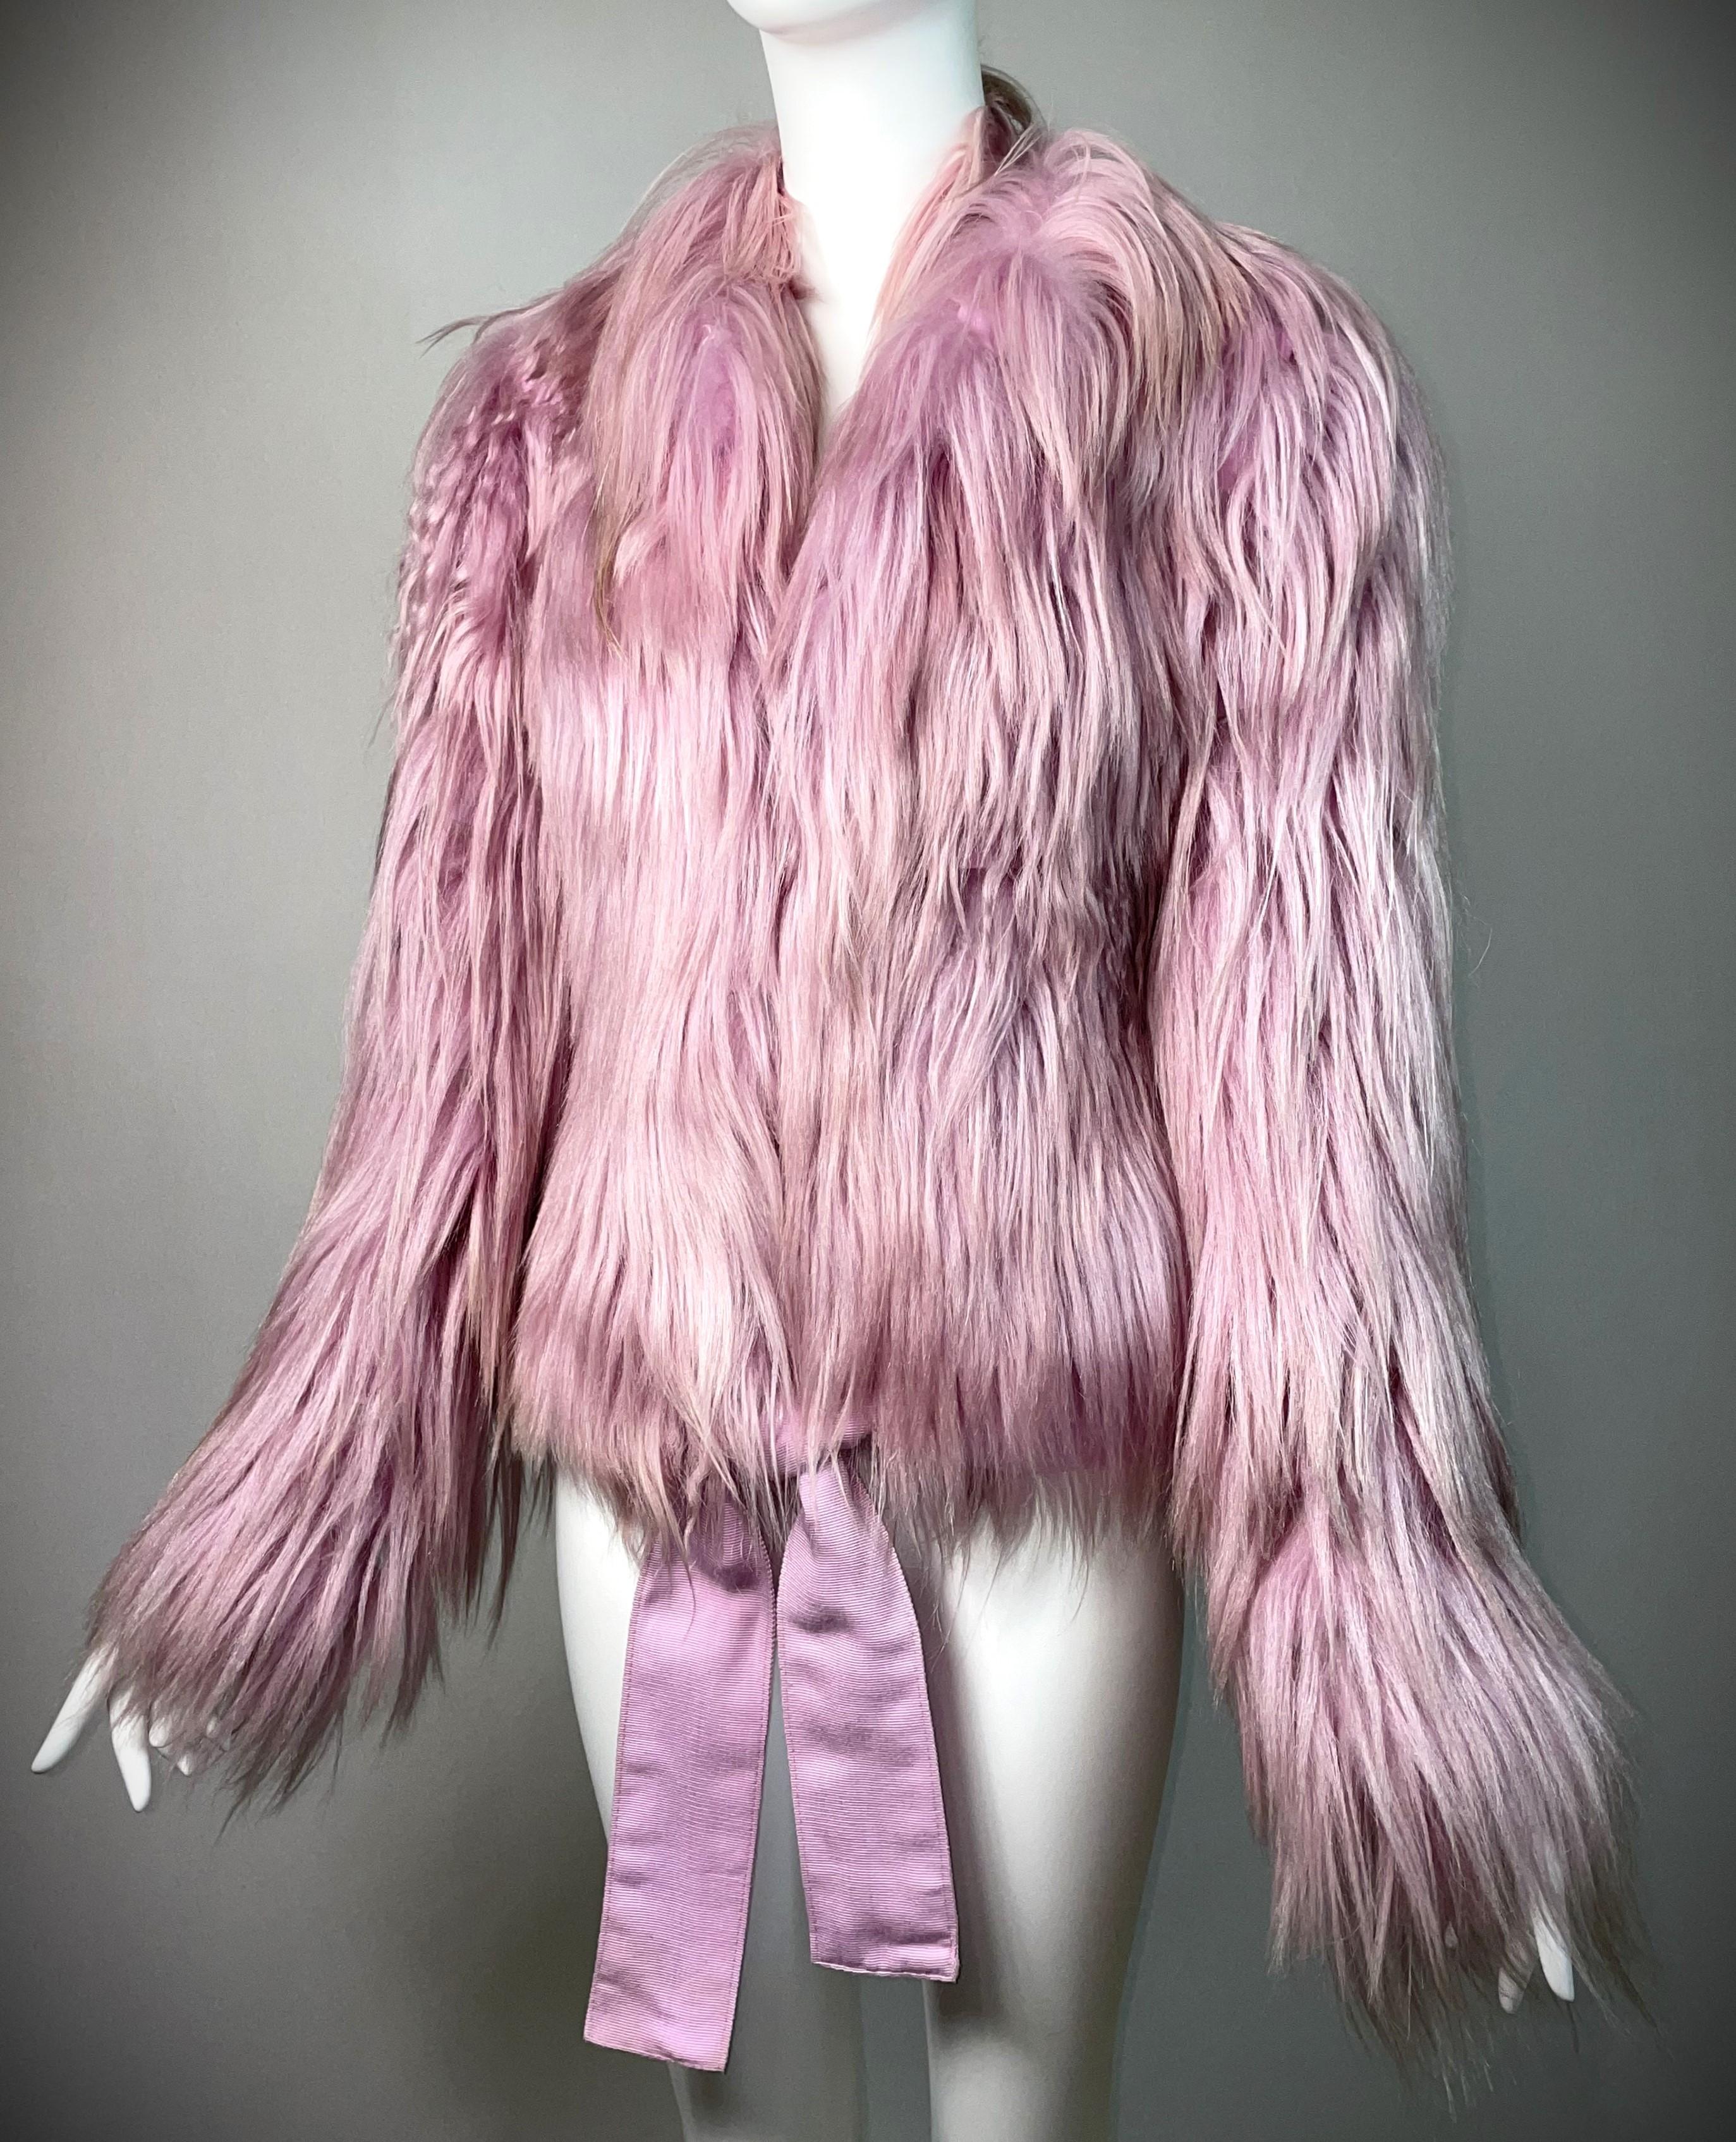 DESIGNER: F/W 2001 Gucci by Tom Ford
CONDITION: Good- tiny dot on lining- see last photo
FABRIC: Kidassia fur lined in silk
COUNTRY MADE: Italy
SIZE: 42
MEASUREMENTS; provided as a courtesy, not a guarantee of fit:
Chest: 36